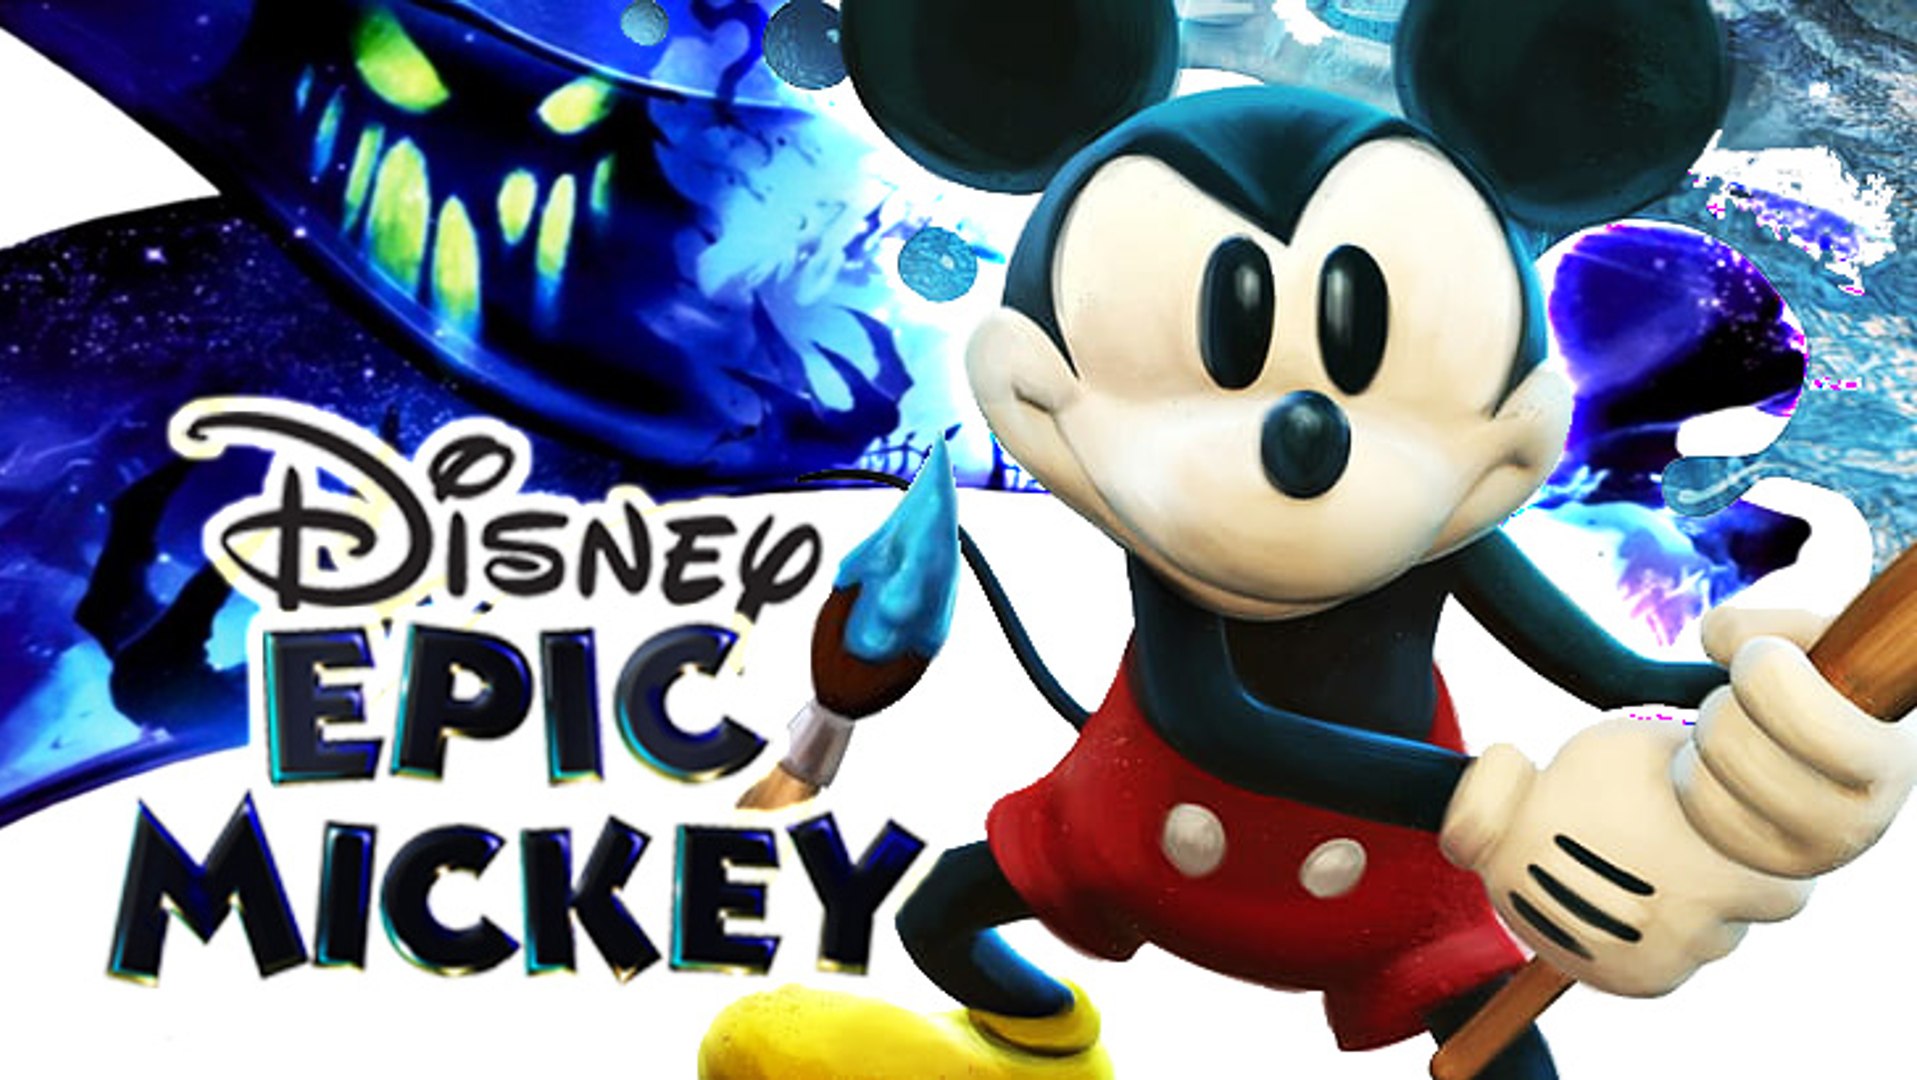 Disney Epic Mickey FULL GAME 100% Longplay (Wii) Paint Path - video  Dailymotion